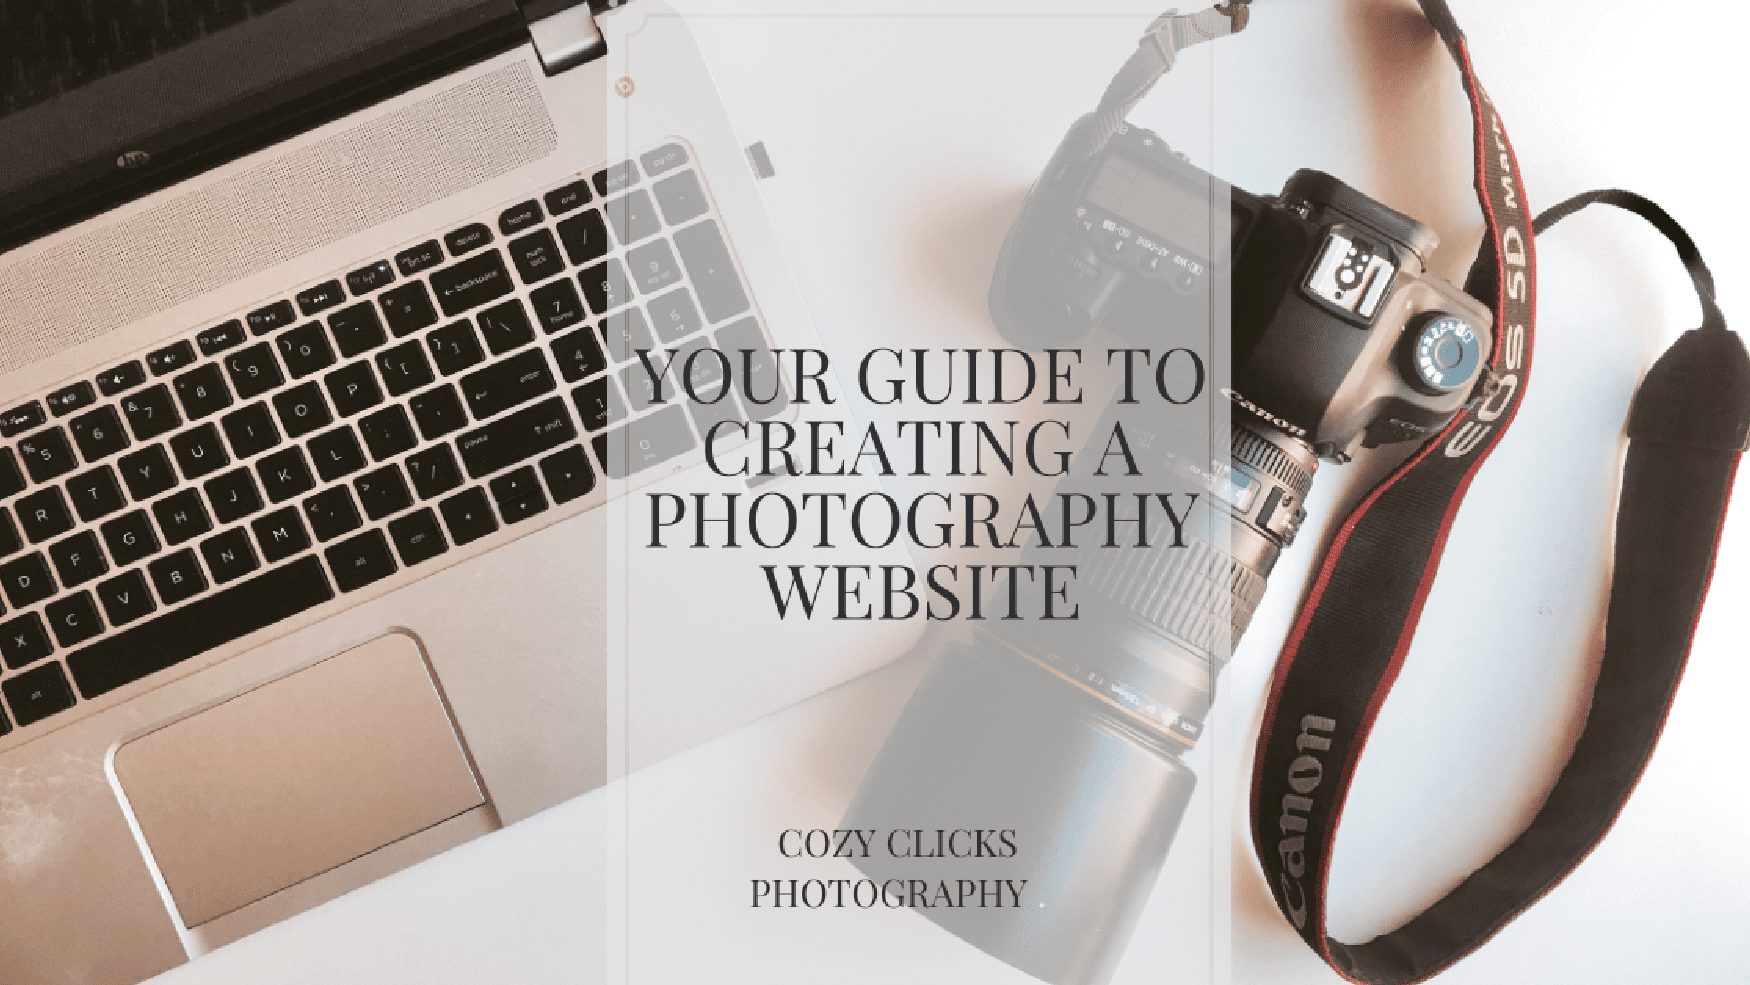 Easy Guide to Creating your photography website. Follow these steps to make your photo website!